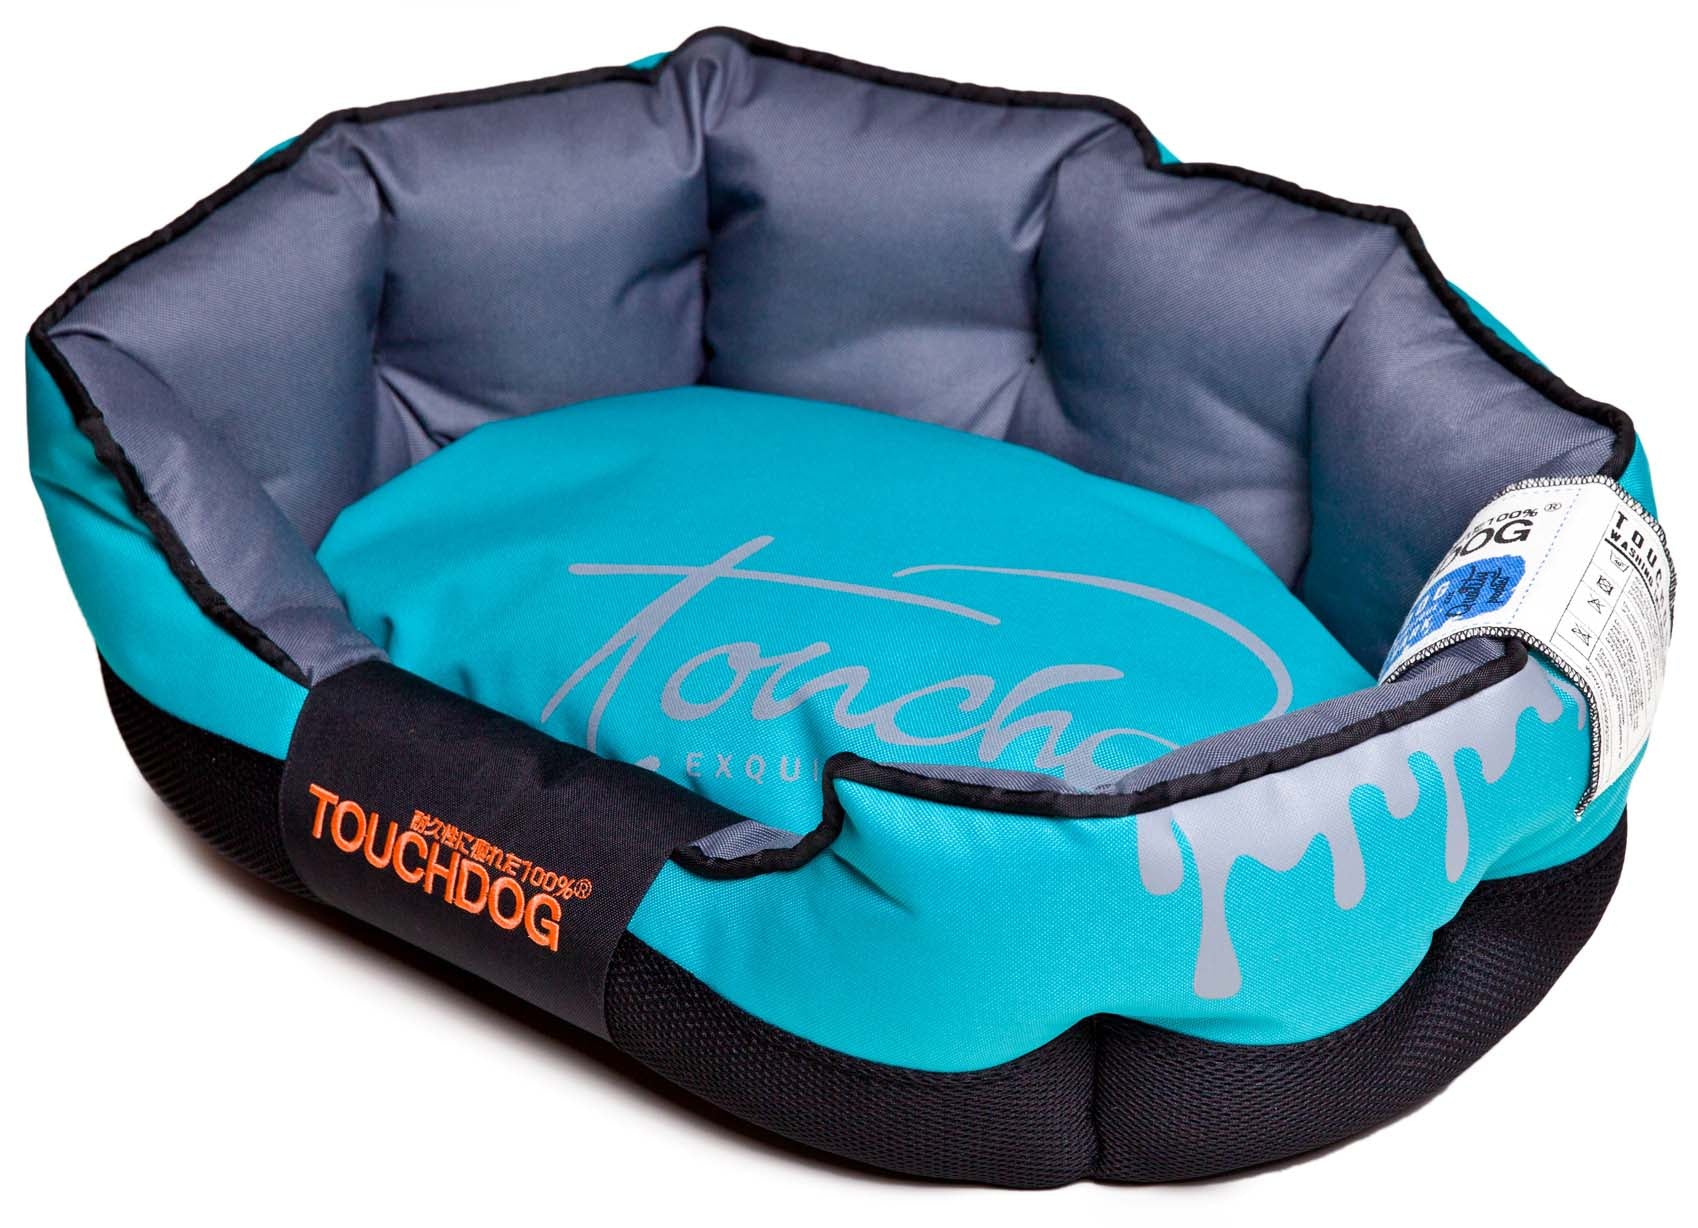 Touchdog® Performance-Max Cushioned Dog Bed - Blue/Black - Large